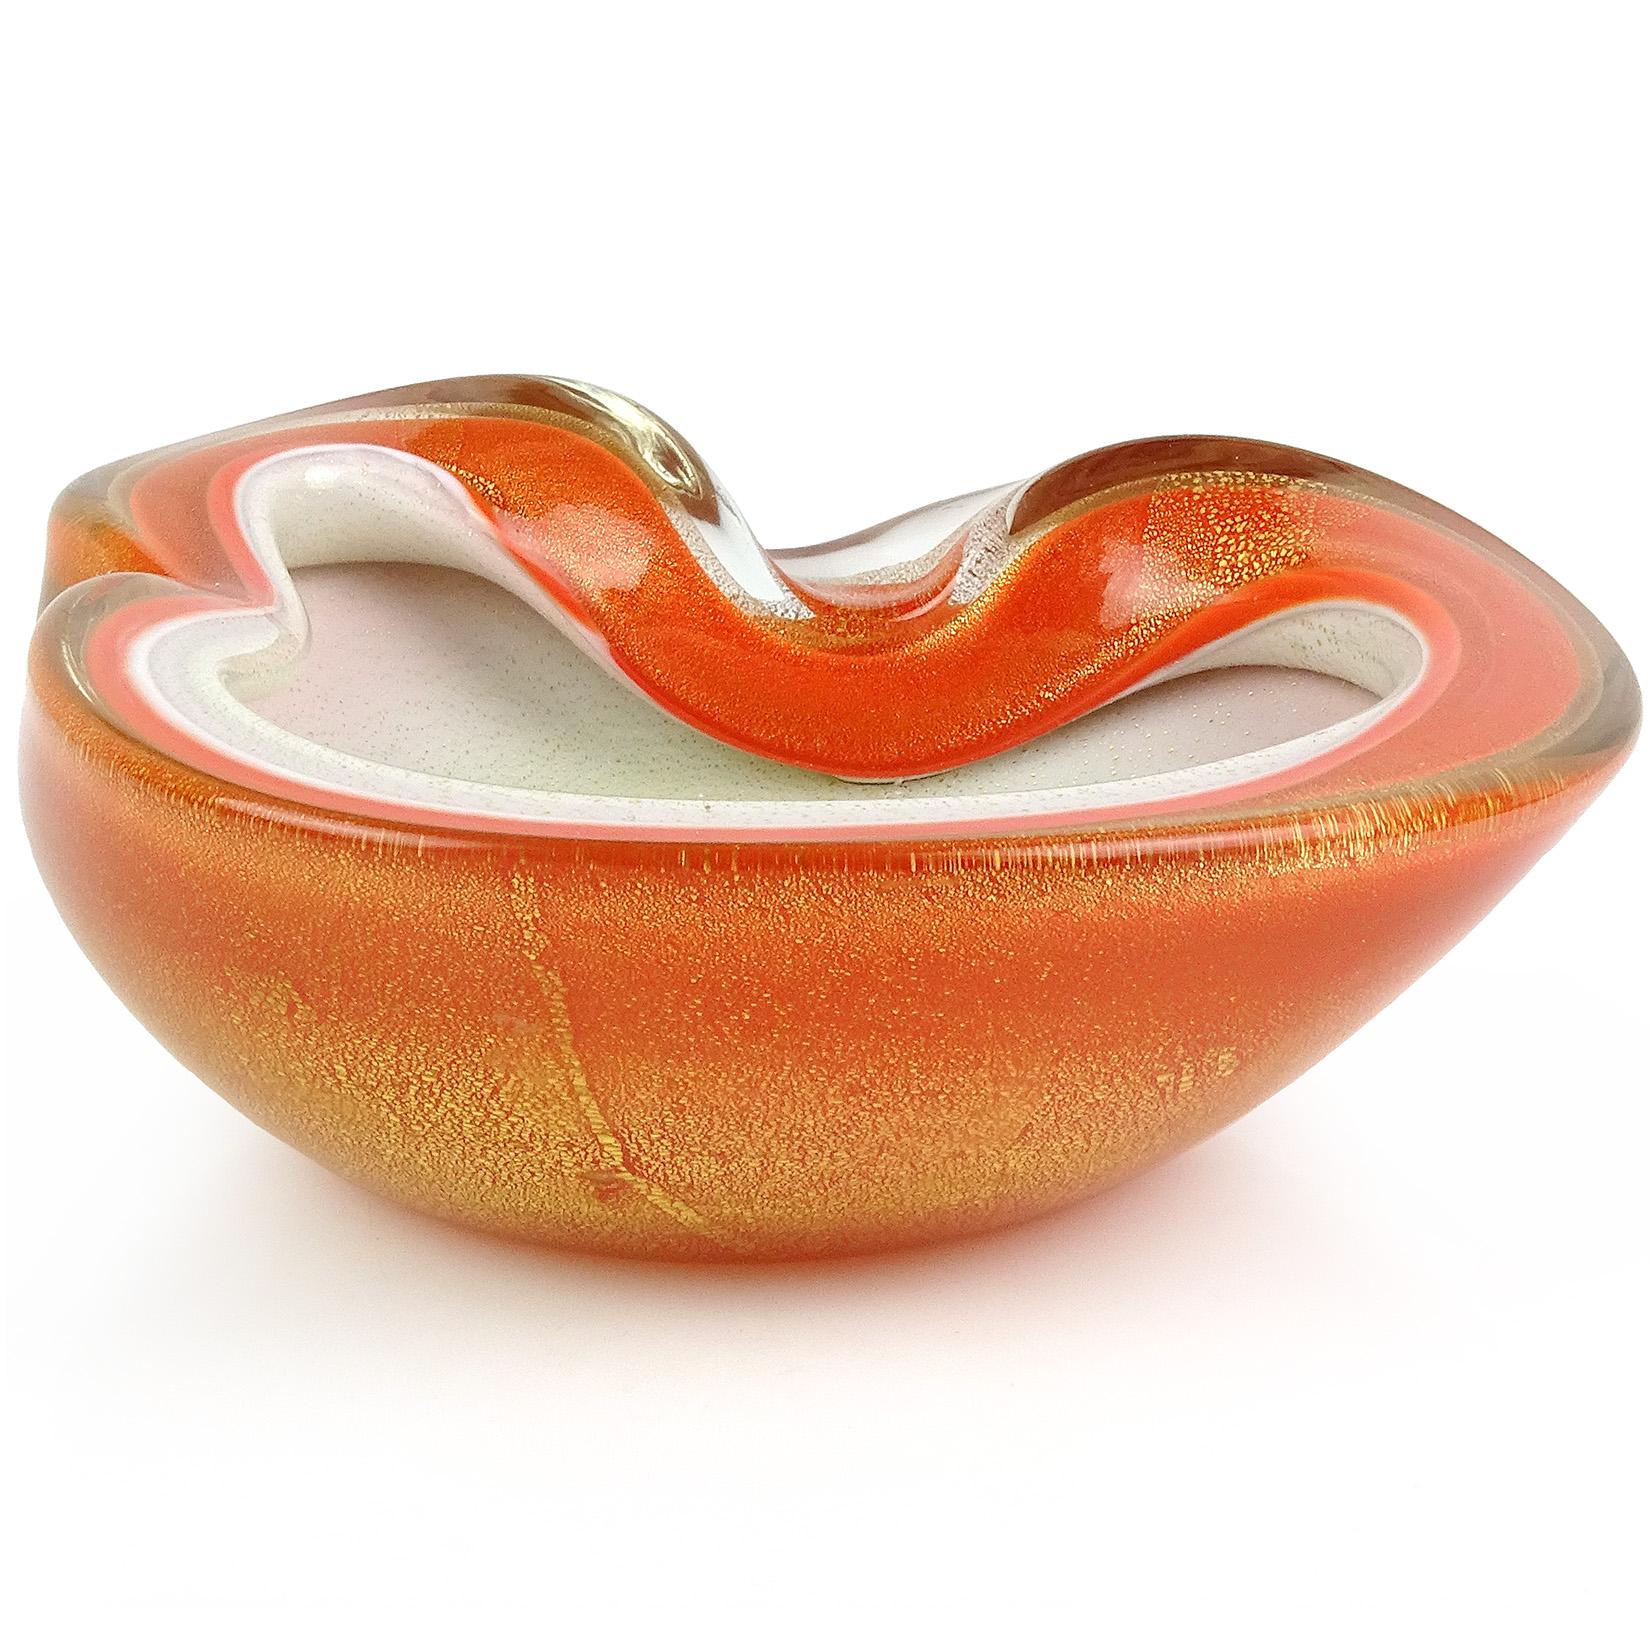 Beautiful vintage Murano hand blown orange over white and gold flecks Italian art glass bowl. Documented to designer Alfredo Barbini, circa 1950-1960. Profusely covered in gold leaf inside and out. Can be used as a display piece on any table. Use it